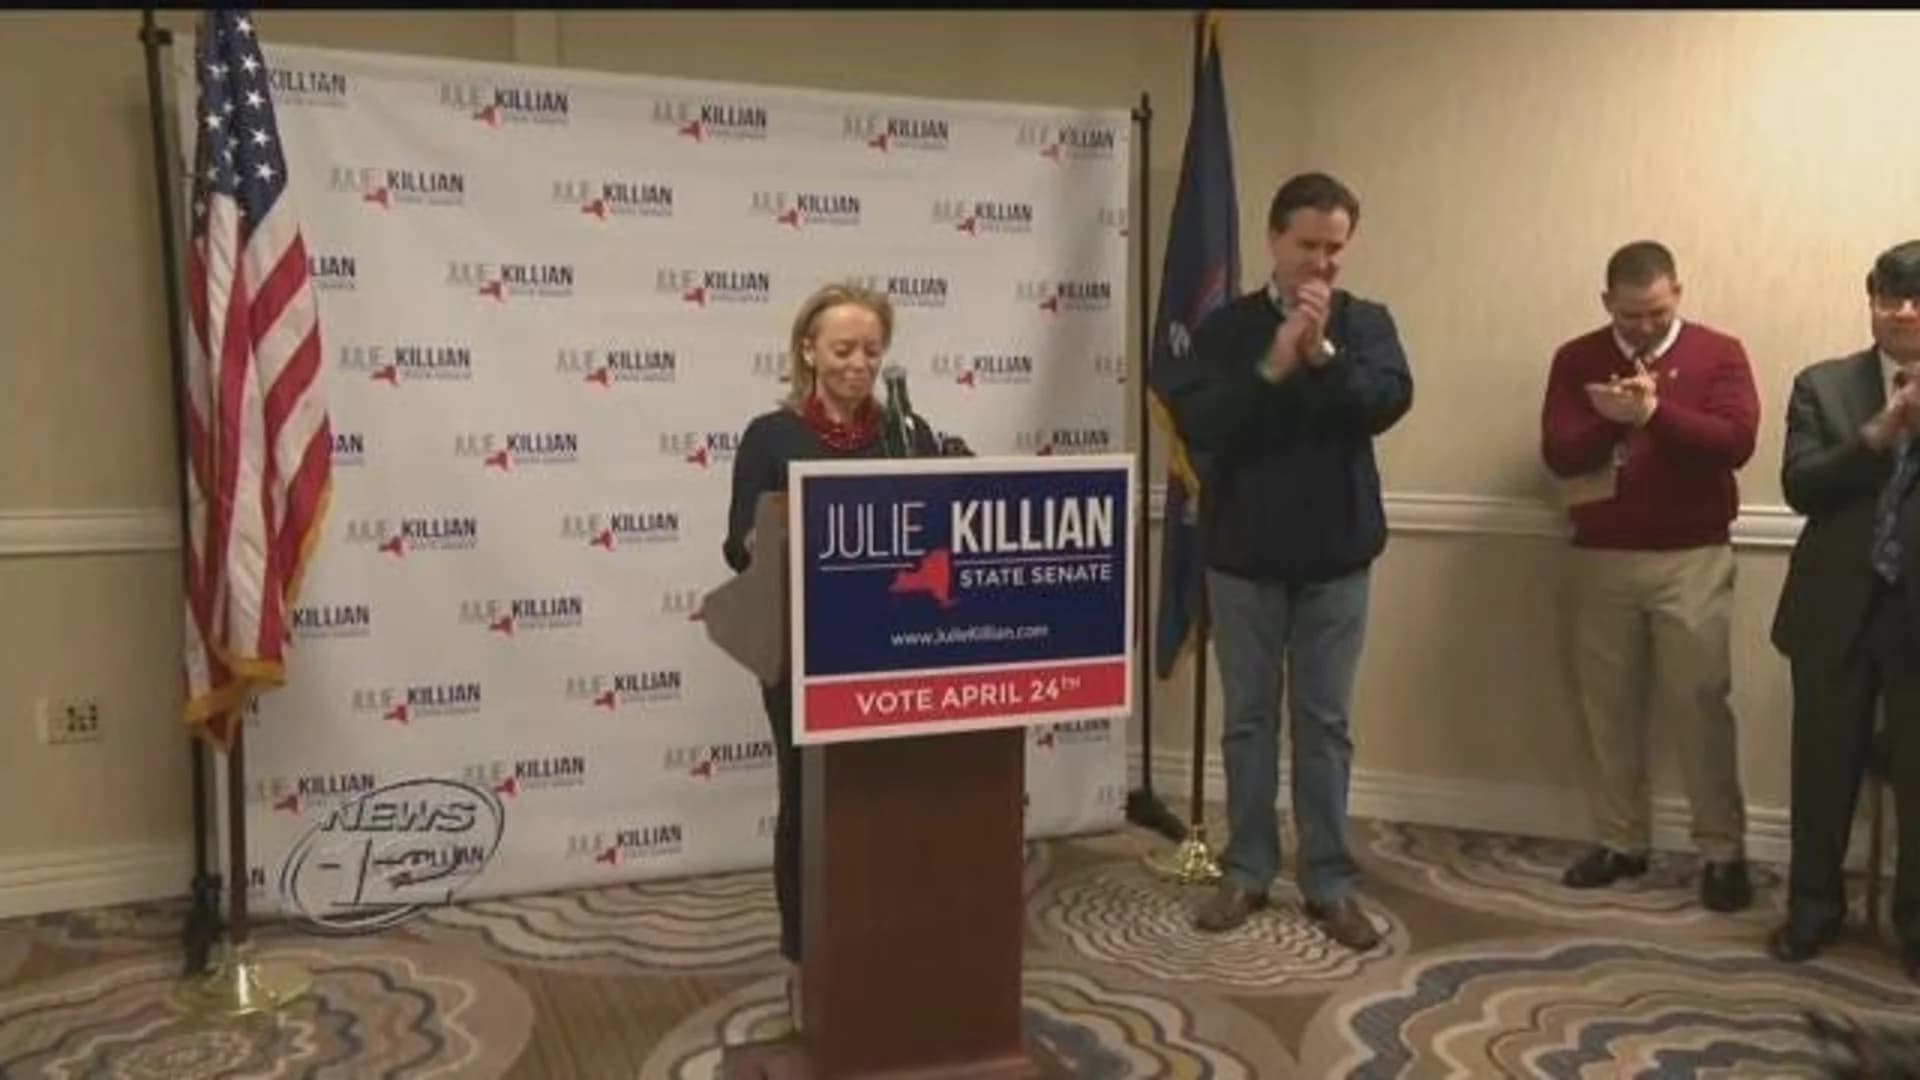 State senate candidates rally ahead of special election